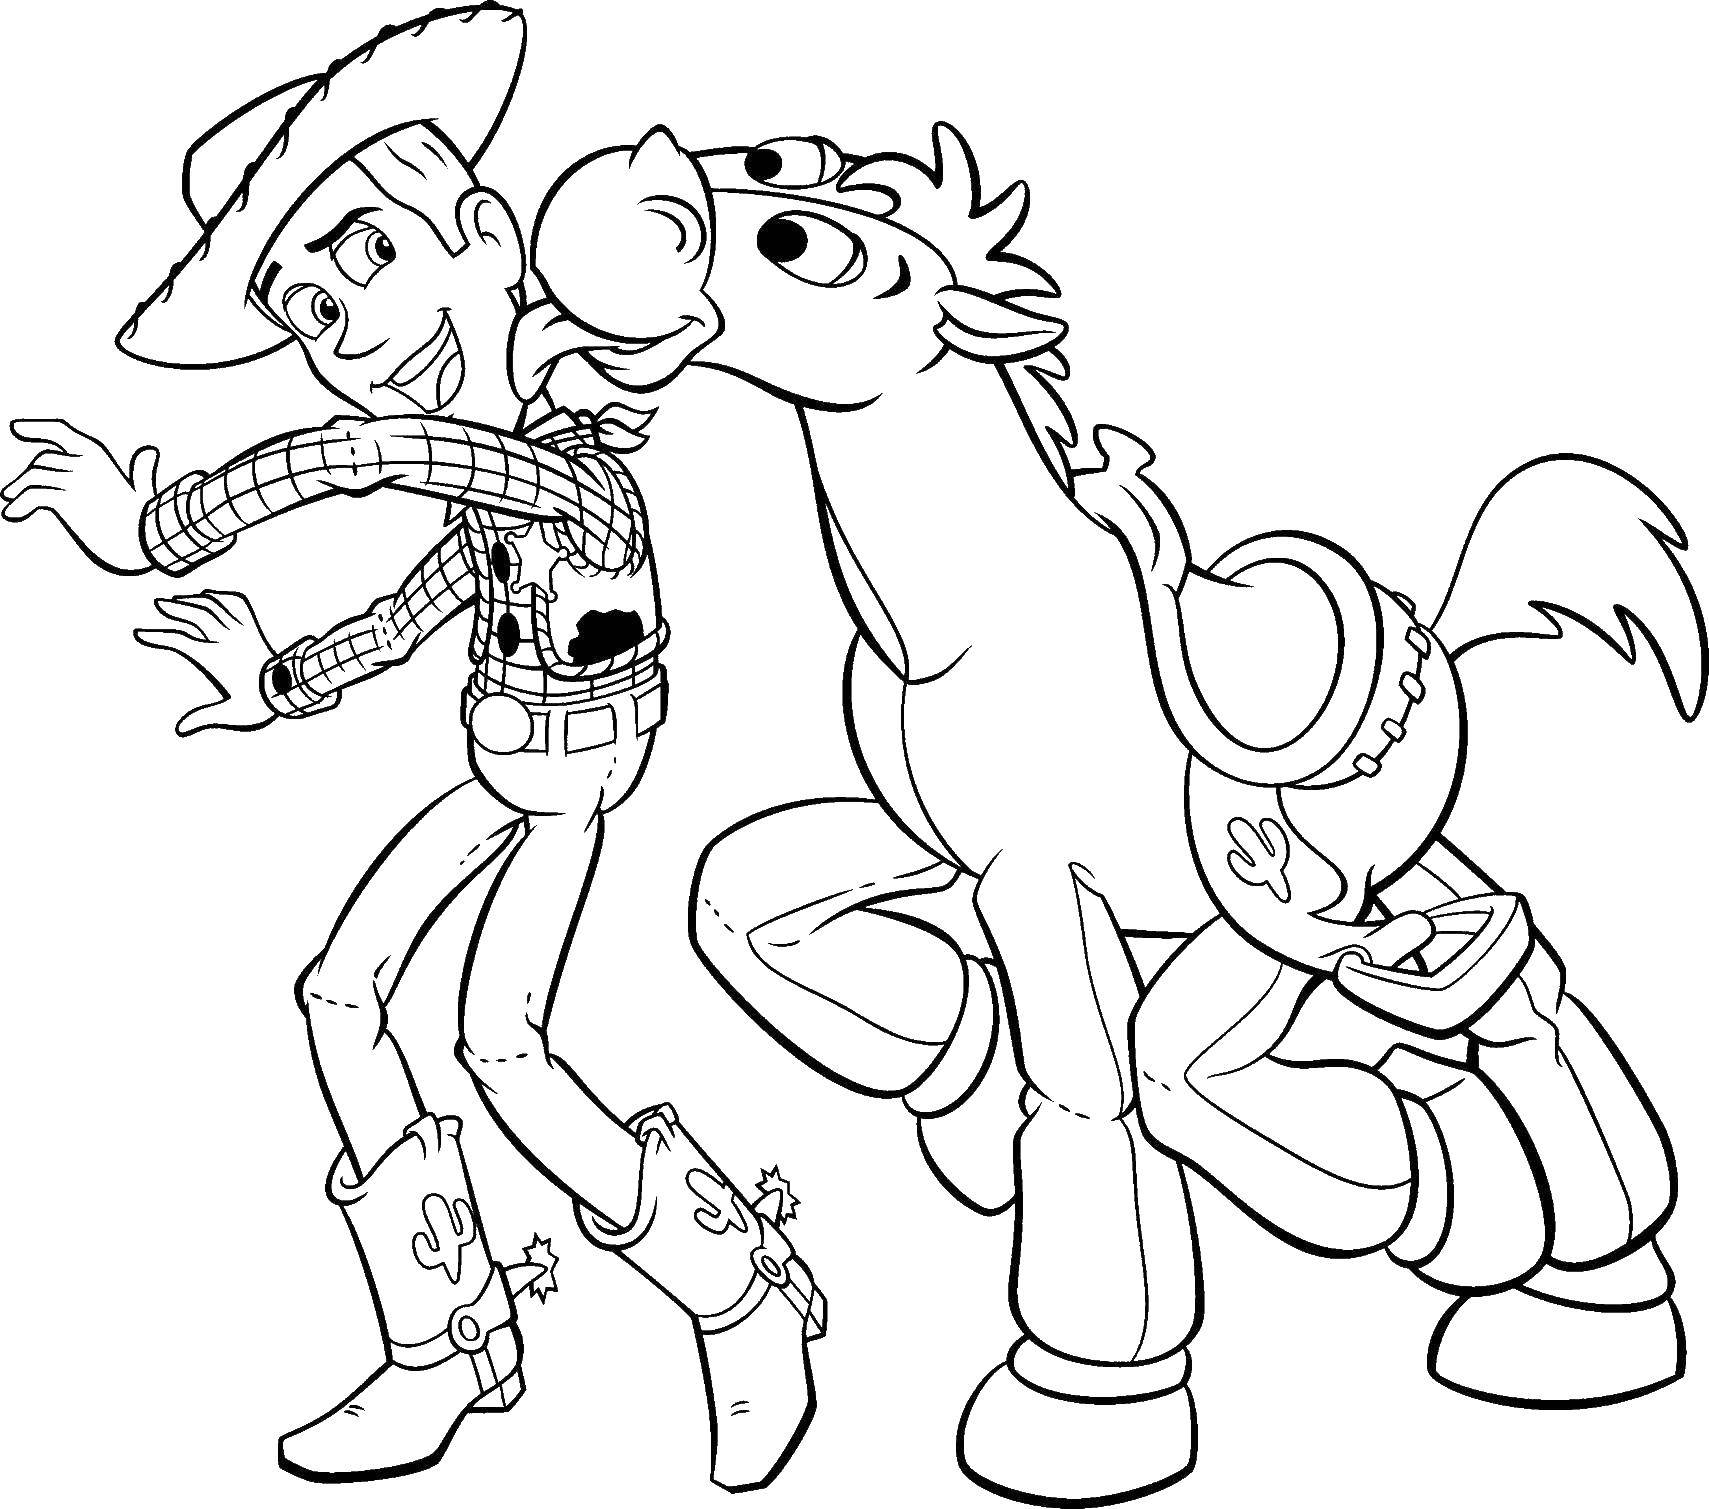 Coloring Busy glad woody. Category toy story. Tags:  Woody, toys.